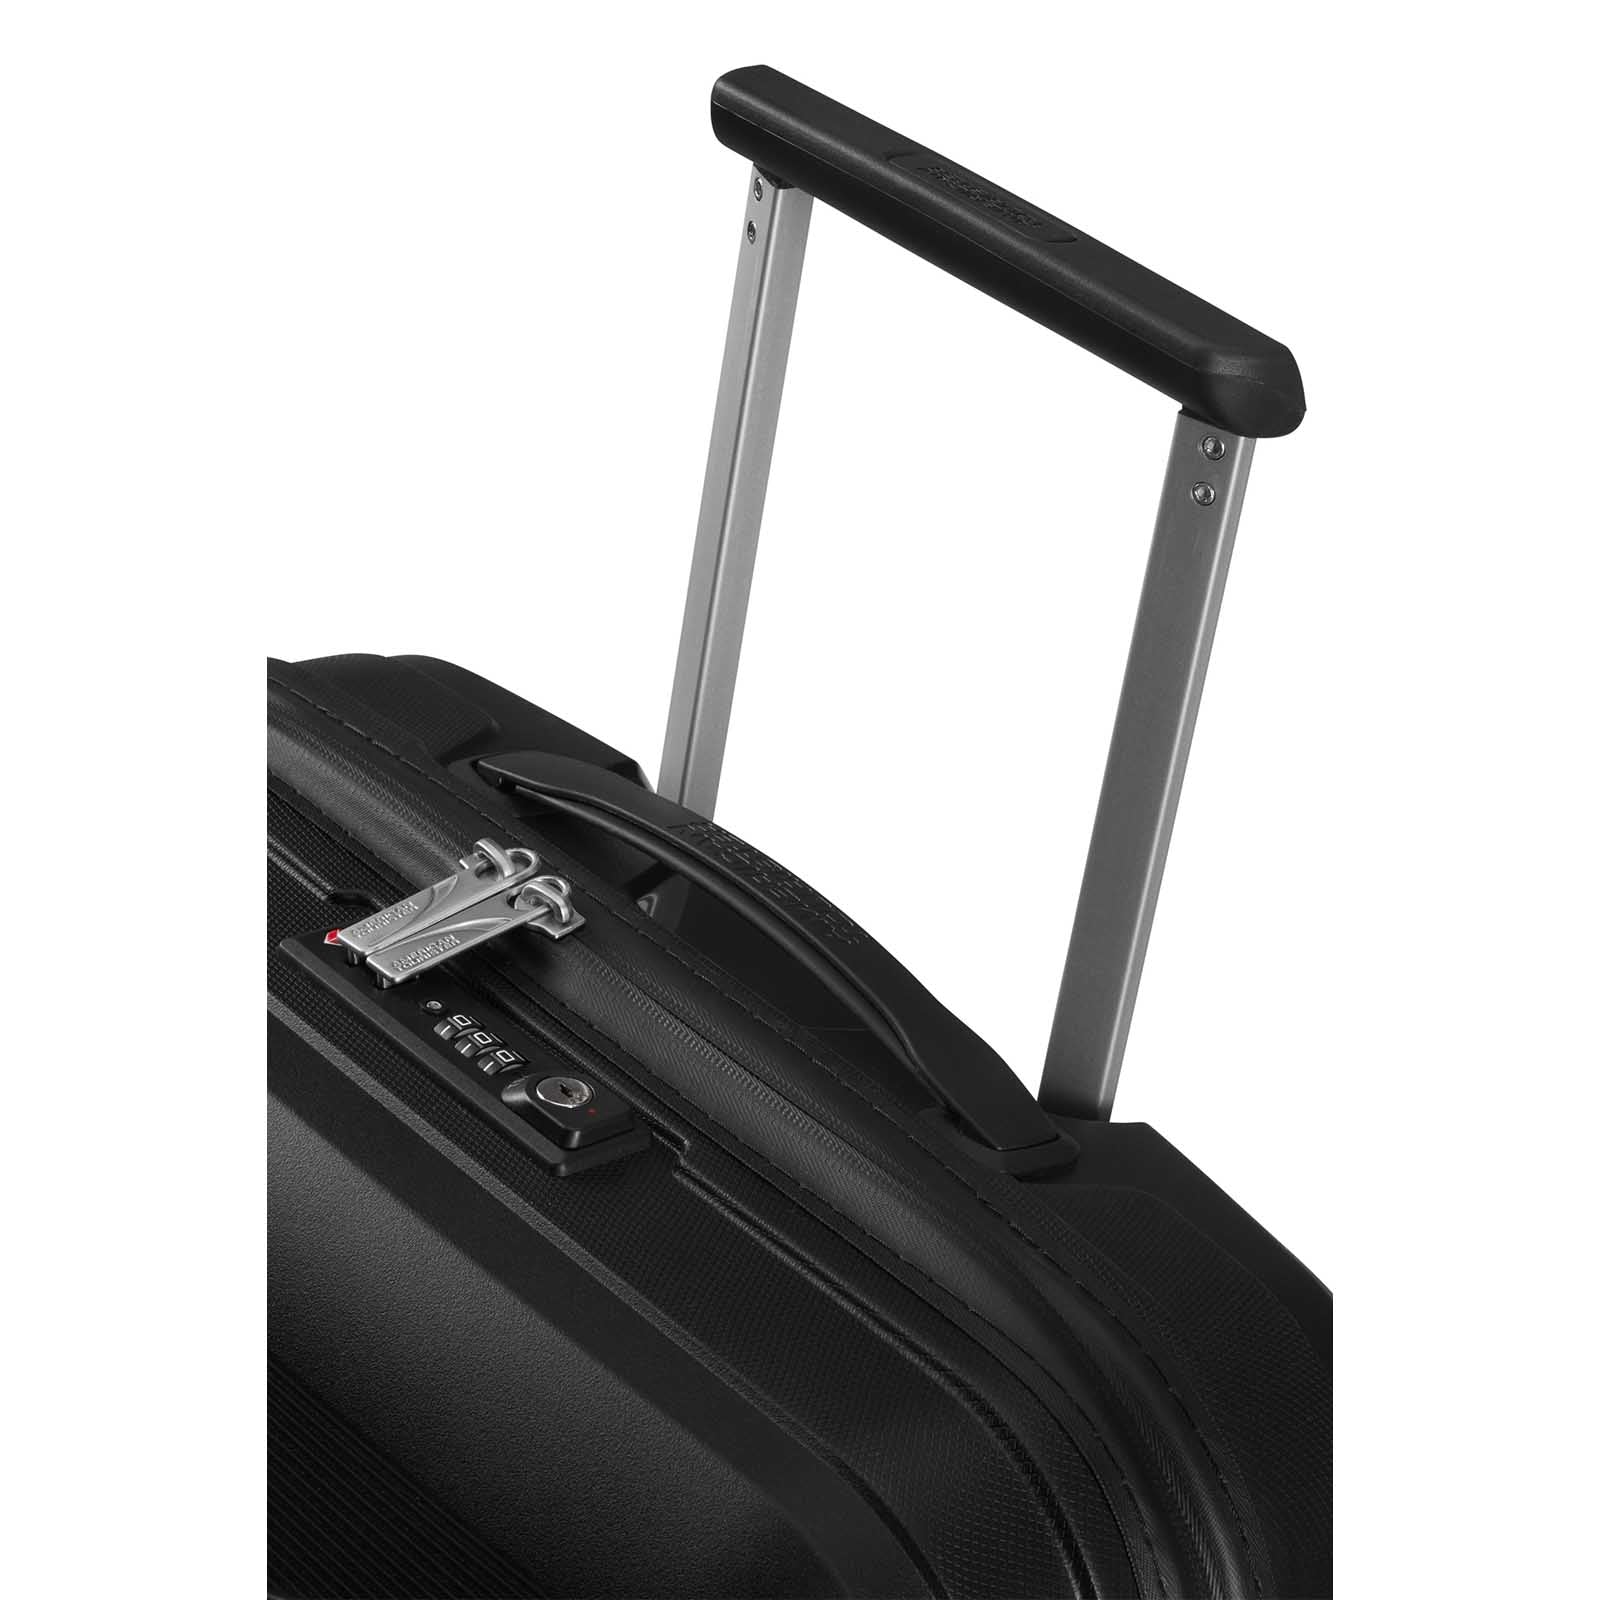 American-Tourister-Airconic-77cm-Suitcase-Onyx-Black-Trolley